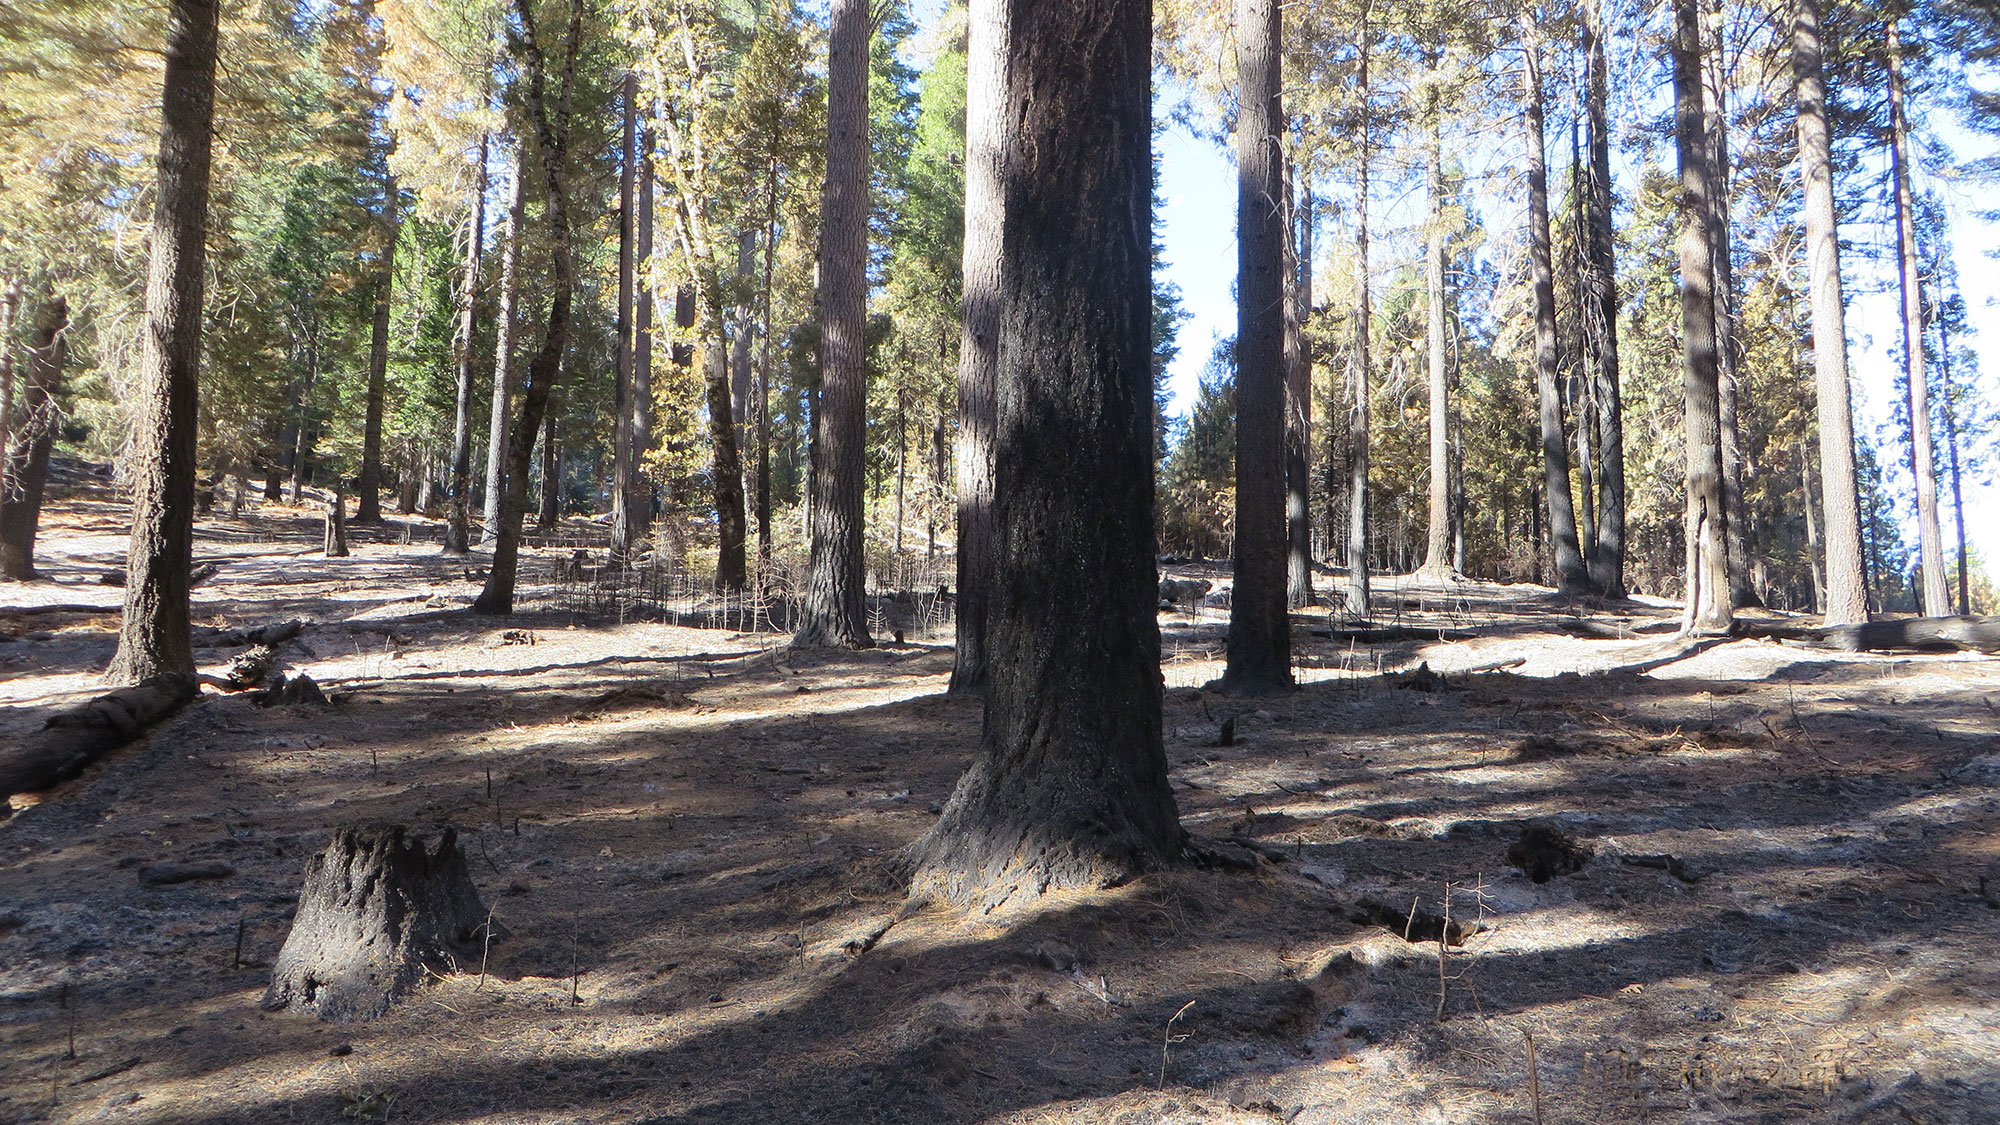 A photo of a section of a conifer forest. The forest floor is clear of dead sticks and debris. Blacked scorch marks extend from the ground up the sides of some of the tree trunks.